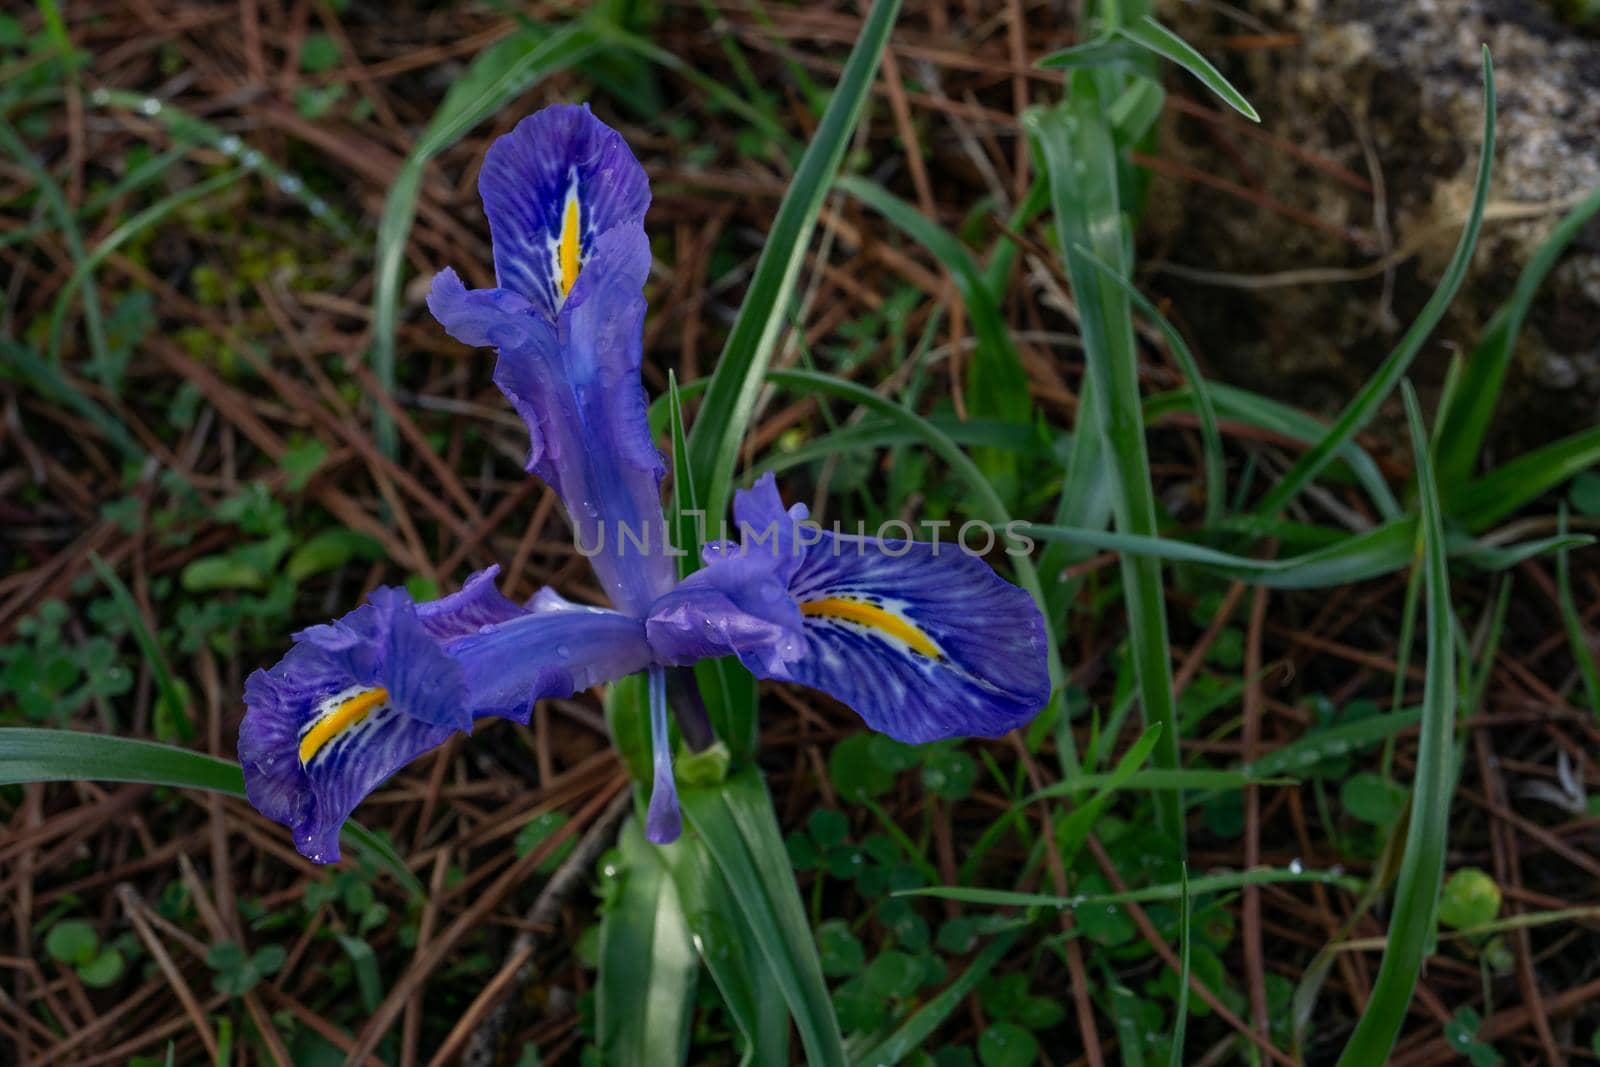 winter lily or "Iris unguicularis" wild plant of the coniferous forests close-up with out-of-focus background